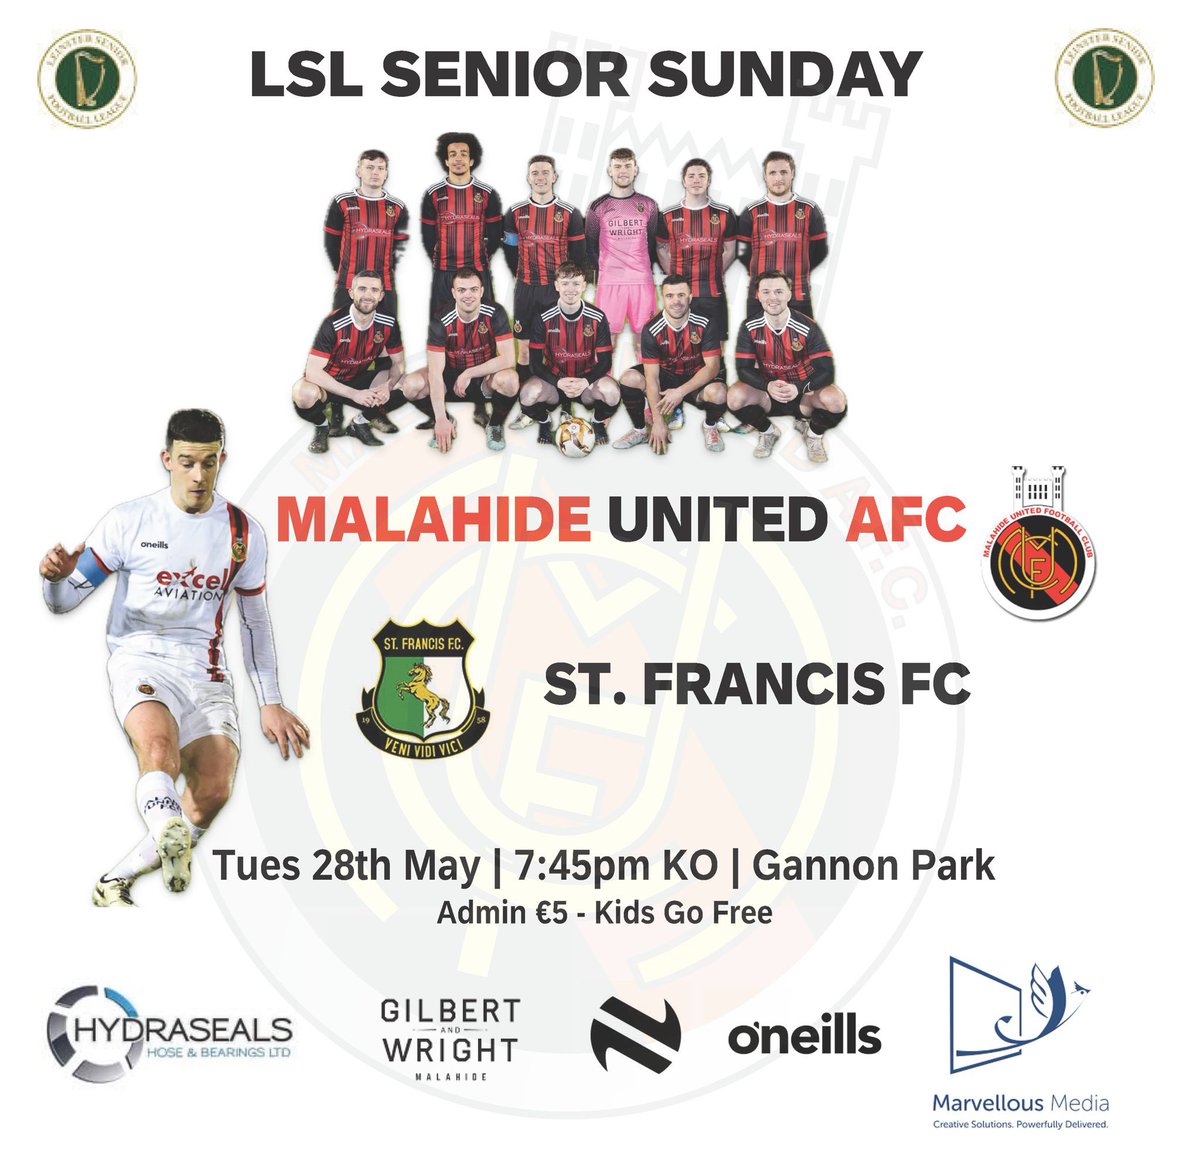 Our Senior Sunday side take on @SeniorsSt this Tuesday night in Gannon Park. Kick off is 7:45pm and all support appreciated 🔴⚫️ #MalahideUtdAFC #muafc #LSLLiveScore @AlQuinn2015 @siobhantaylorphotos.ie 
📷Paul Maguire